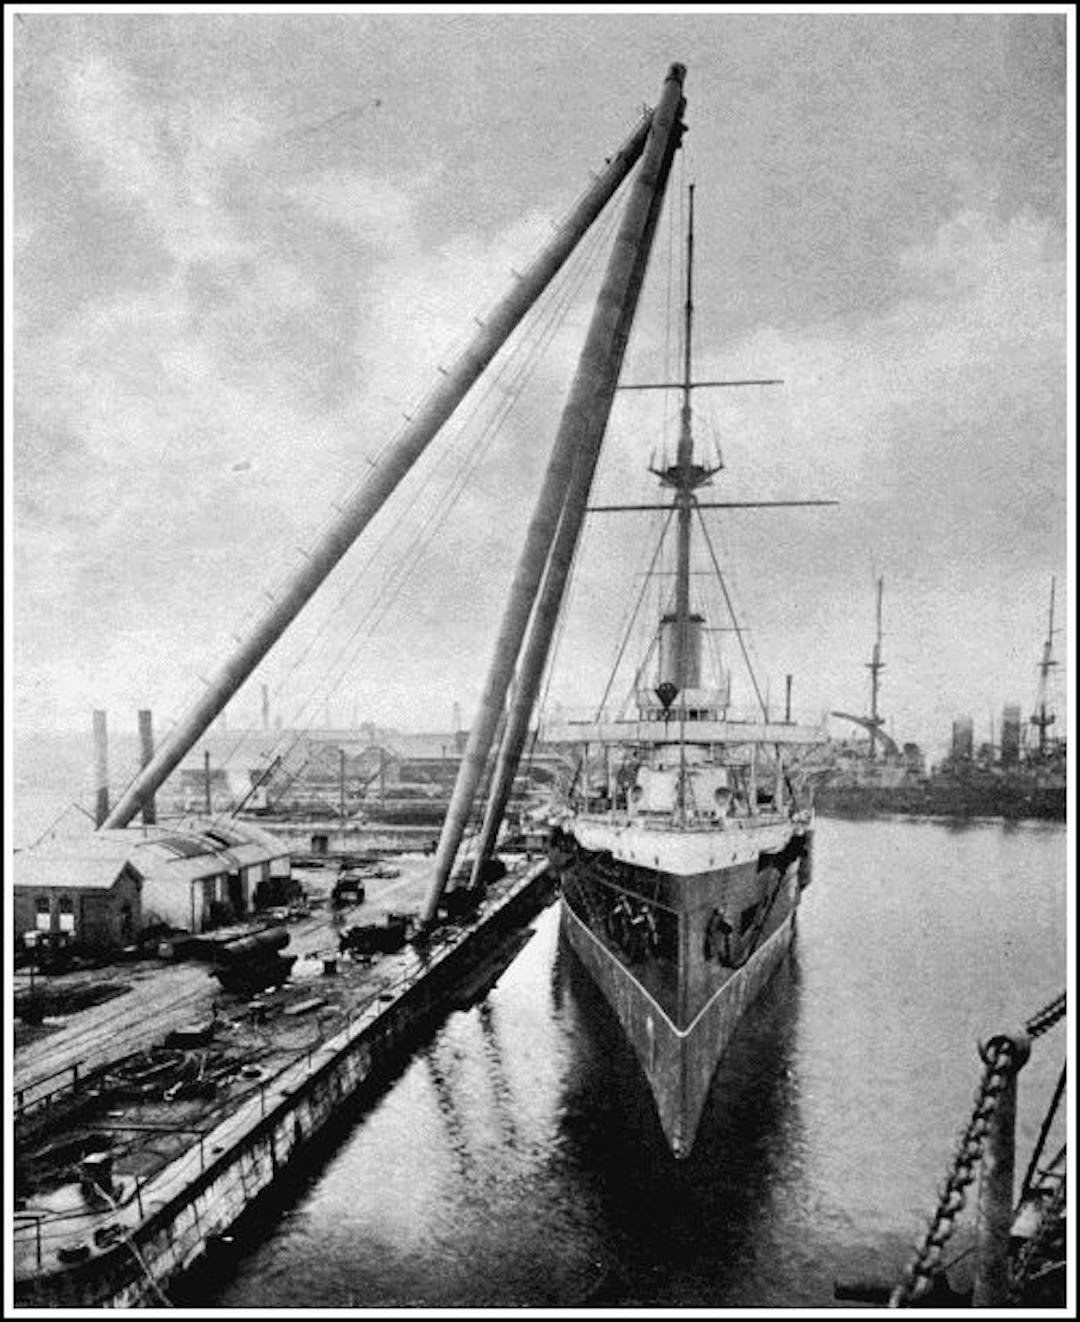 A gigantic sheer-legs used for lowering boilers, big guns, turrets, etc., into men-of-war. The legs rise to a height of 140 feet, and will handle weights up to 150 tons.